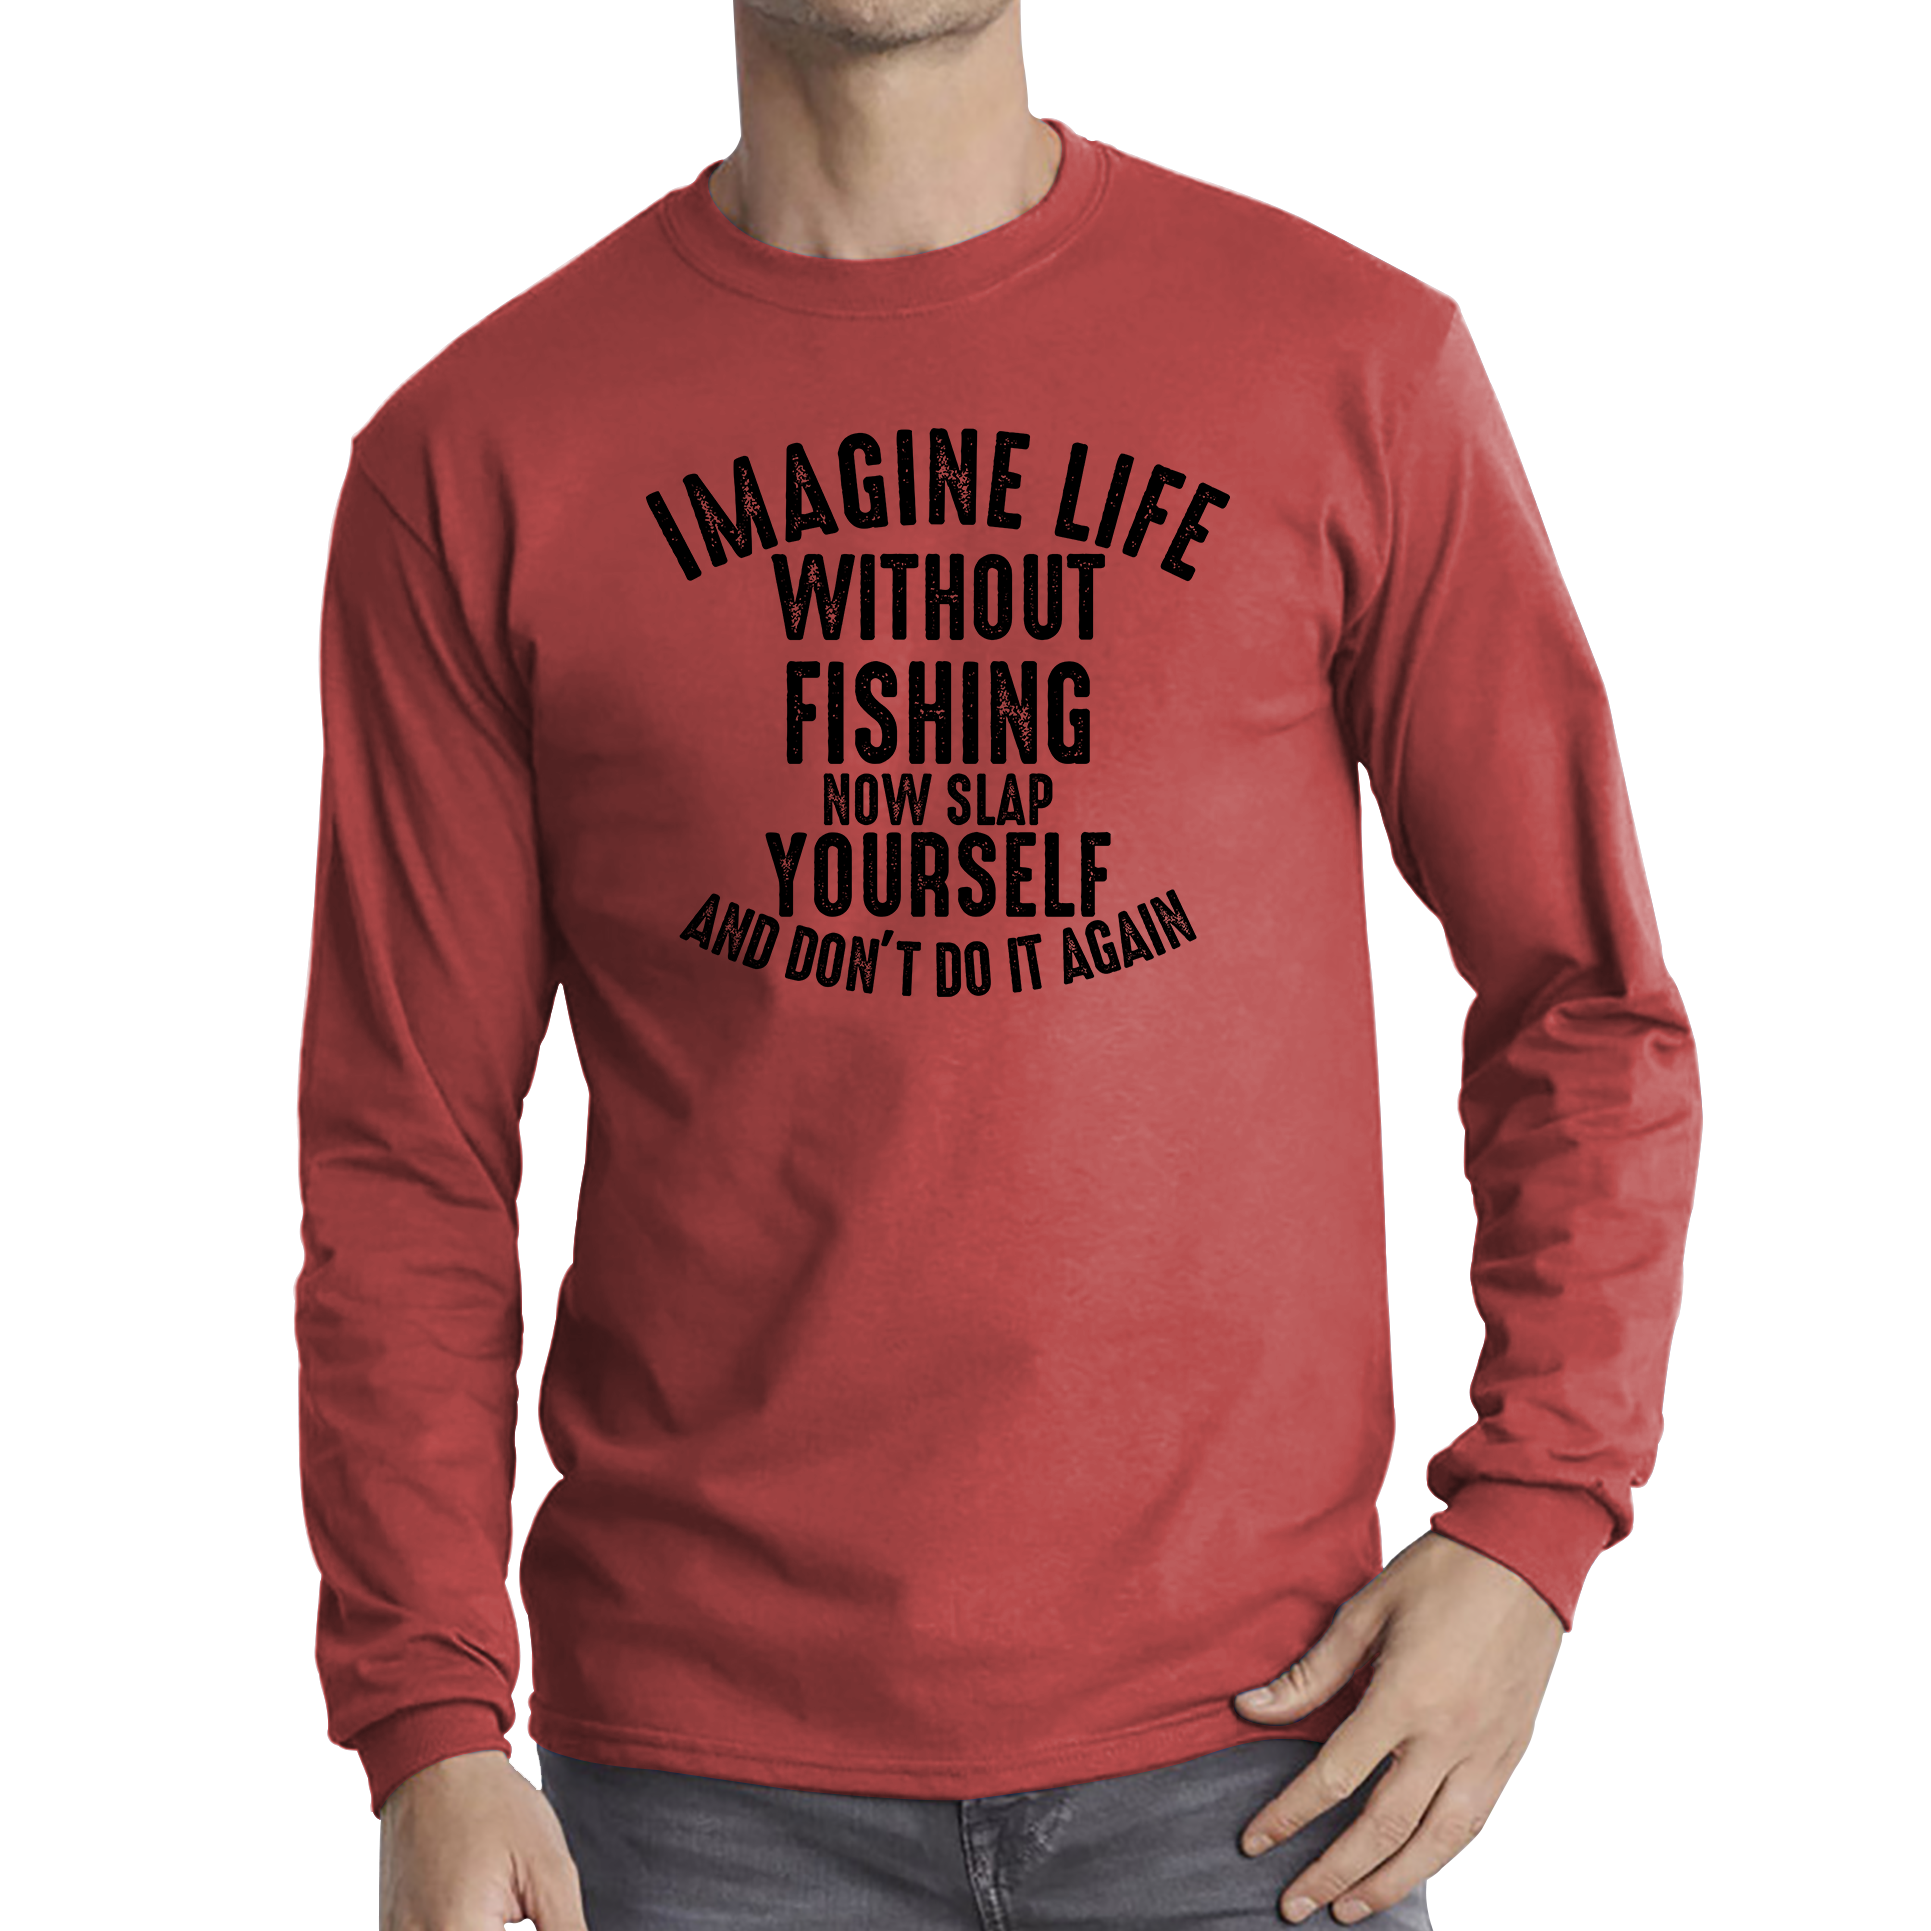 Imagine Life Without Fishing Now Slap Yourself And Don't Do It Again Shirt Fisherman Fishing Adventure Hobby Funny Long Sleeve T Shirt